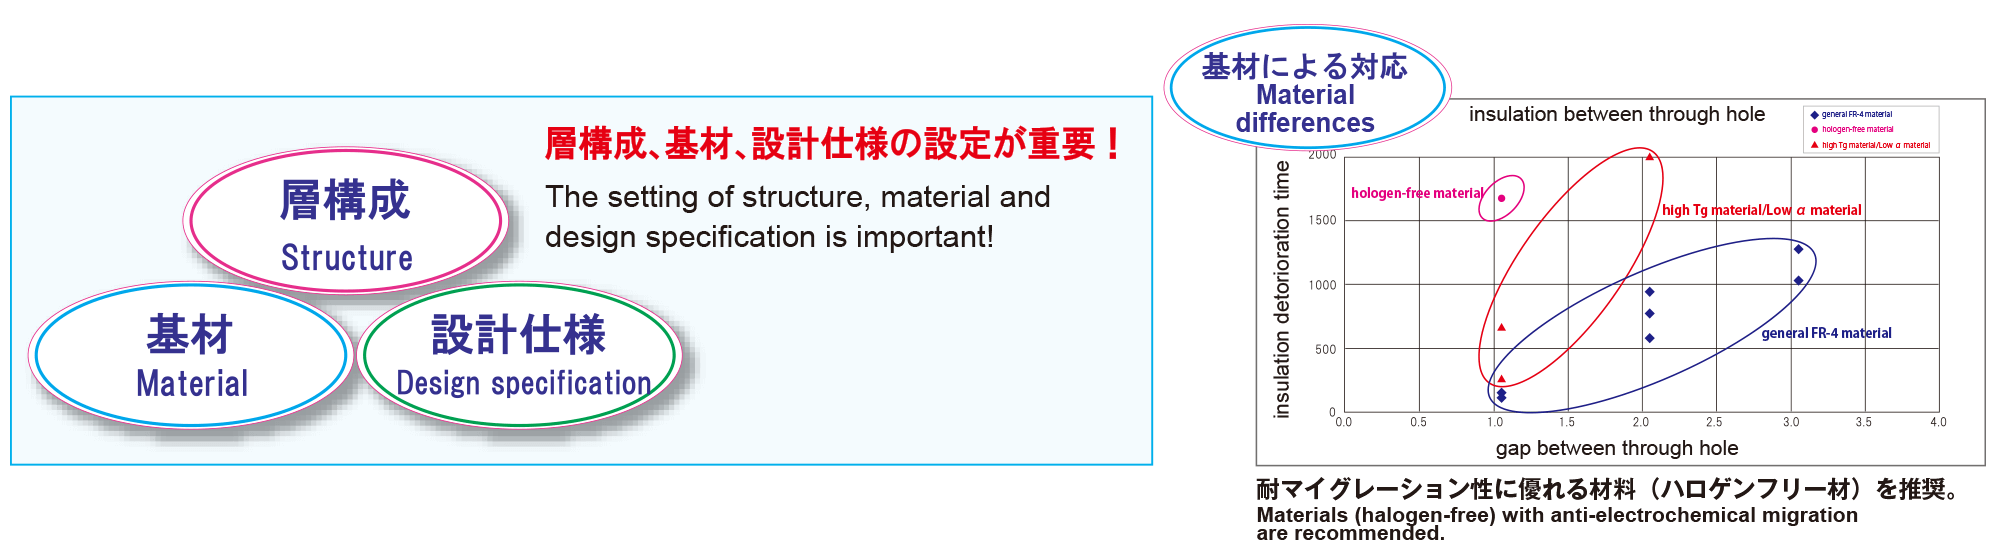 the setting of structure, material and design specification is important! Materials(halogen-free) with anti-electrochemical migration are recommended.